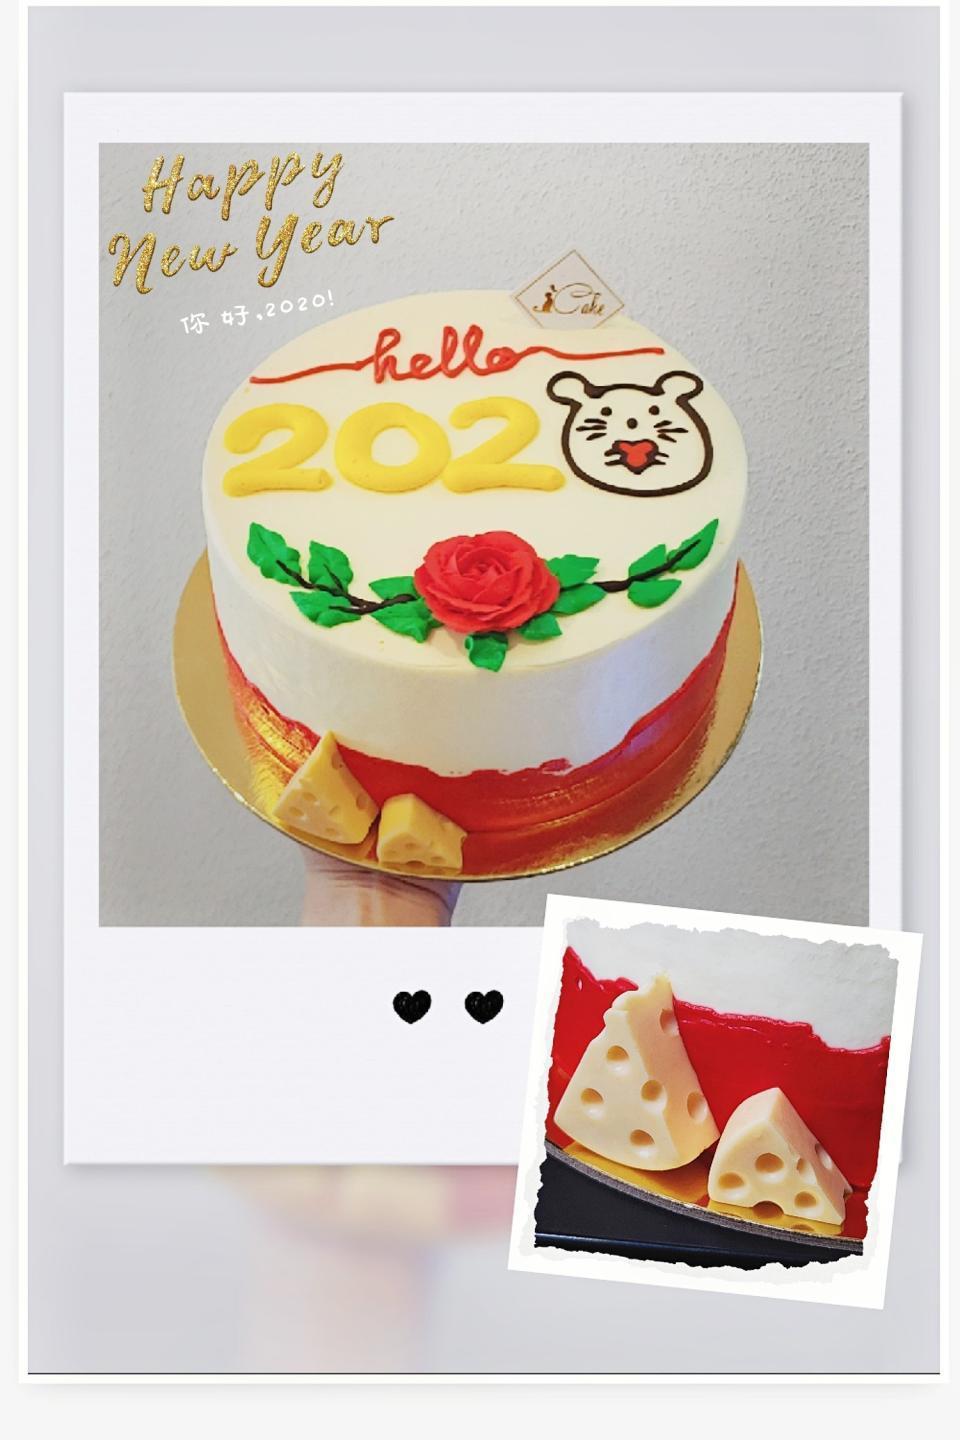 Pâtisserie La Rose - New Year's Eve 2022 🕰✨ For order or info pls contact  us ☎️07/220546 📲 71/798417 📲70/421153 (Rejy Branch) #newyearcake  #newyear2022 #clockcake #cakes #cakedecorating #picoftheday #yummy  #celebration #trendingcakes #flavors ...